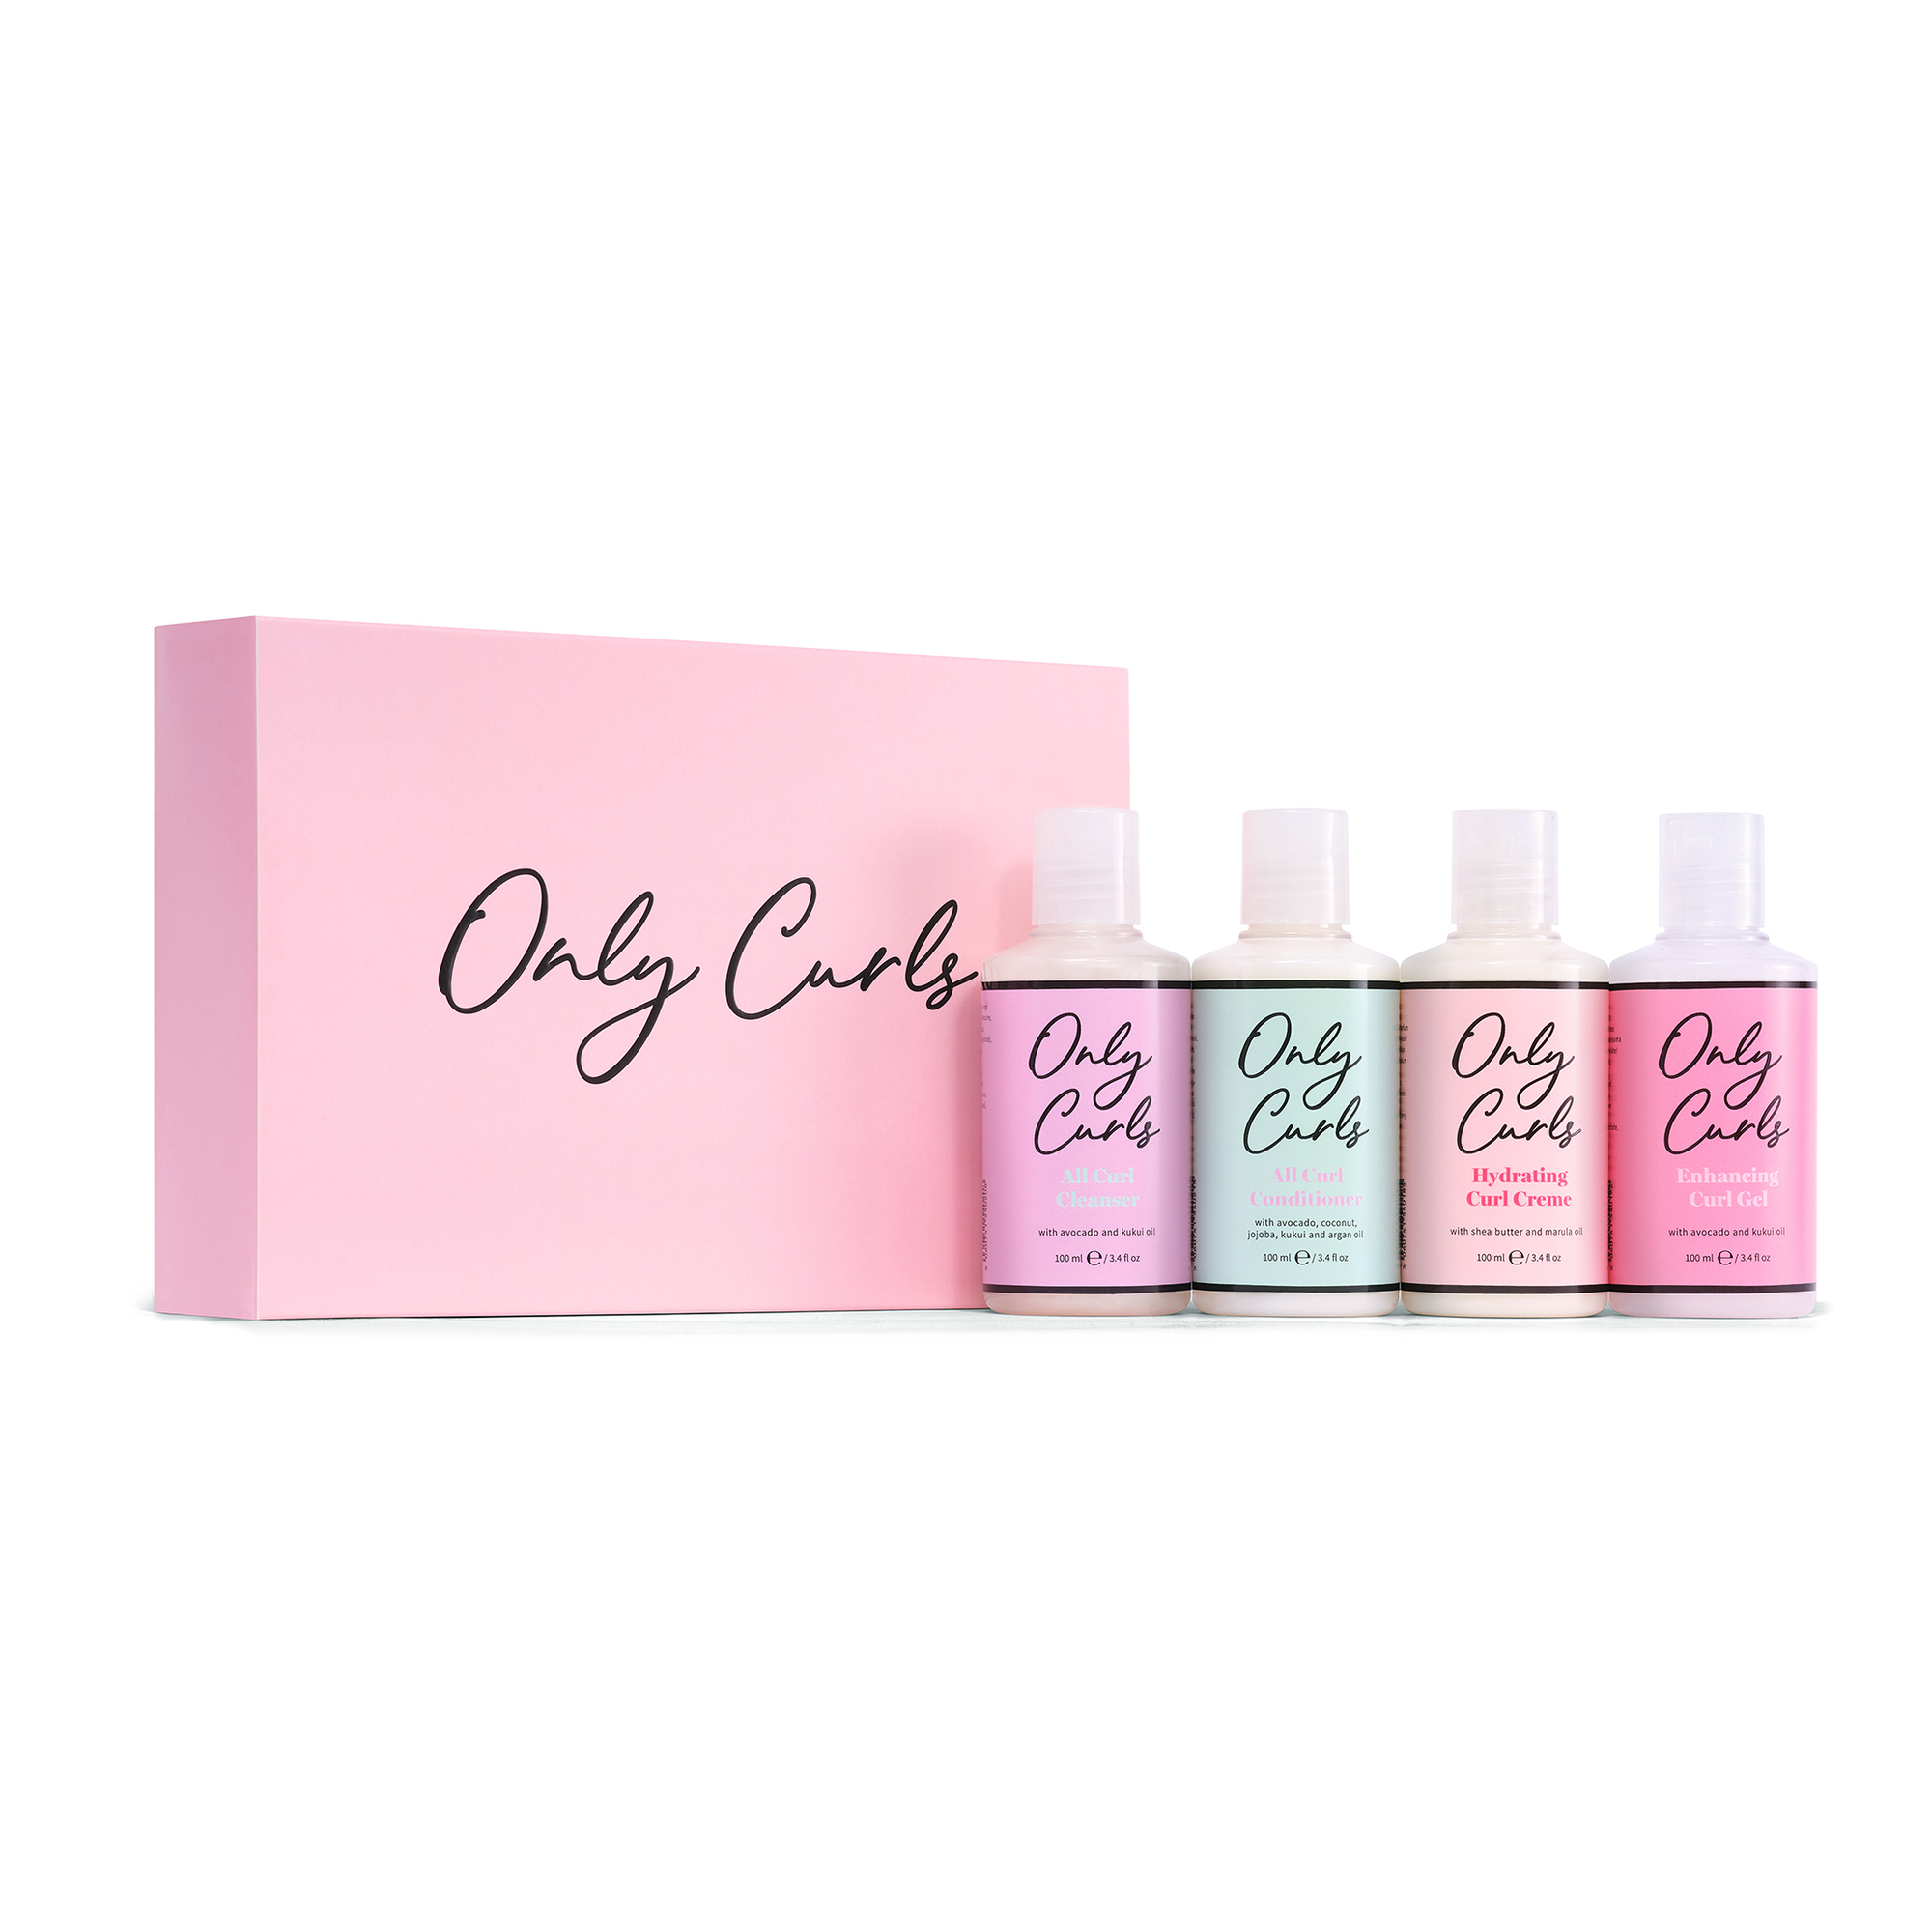 Only Curls Collection of Mini Travel Size Bottles